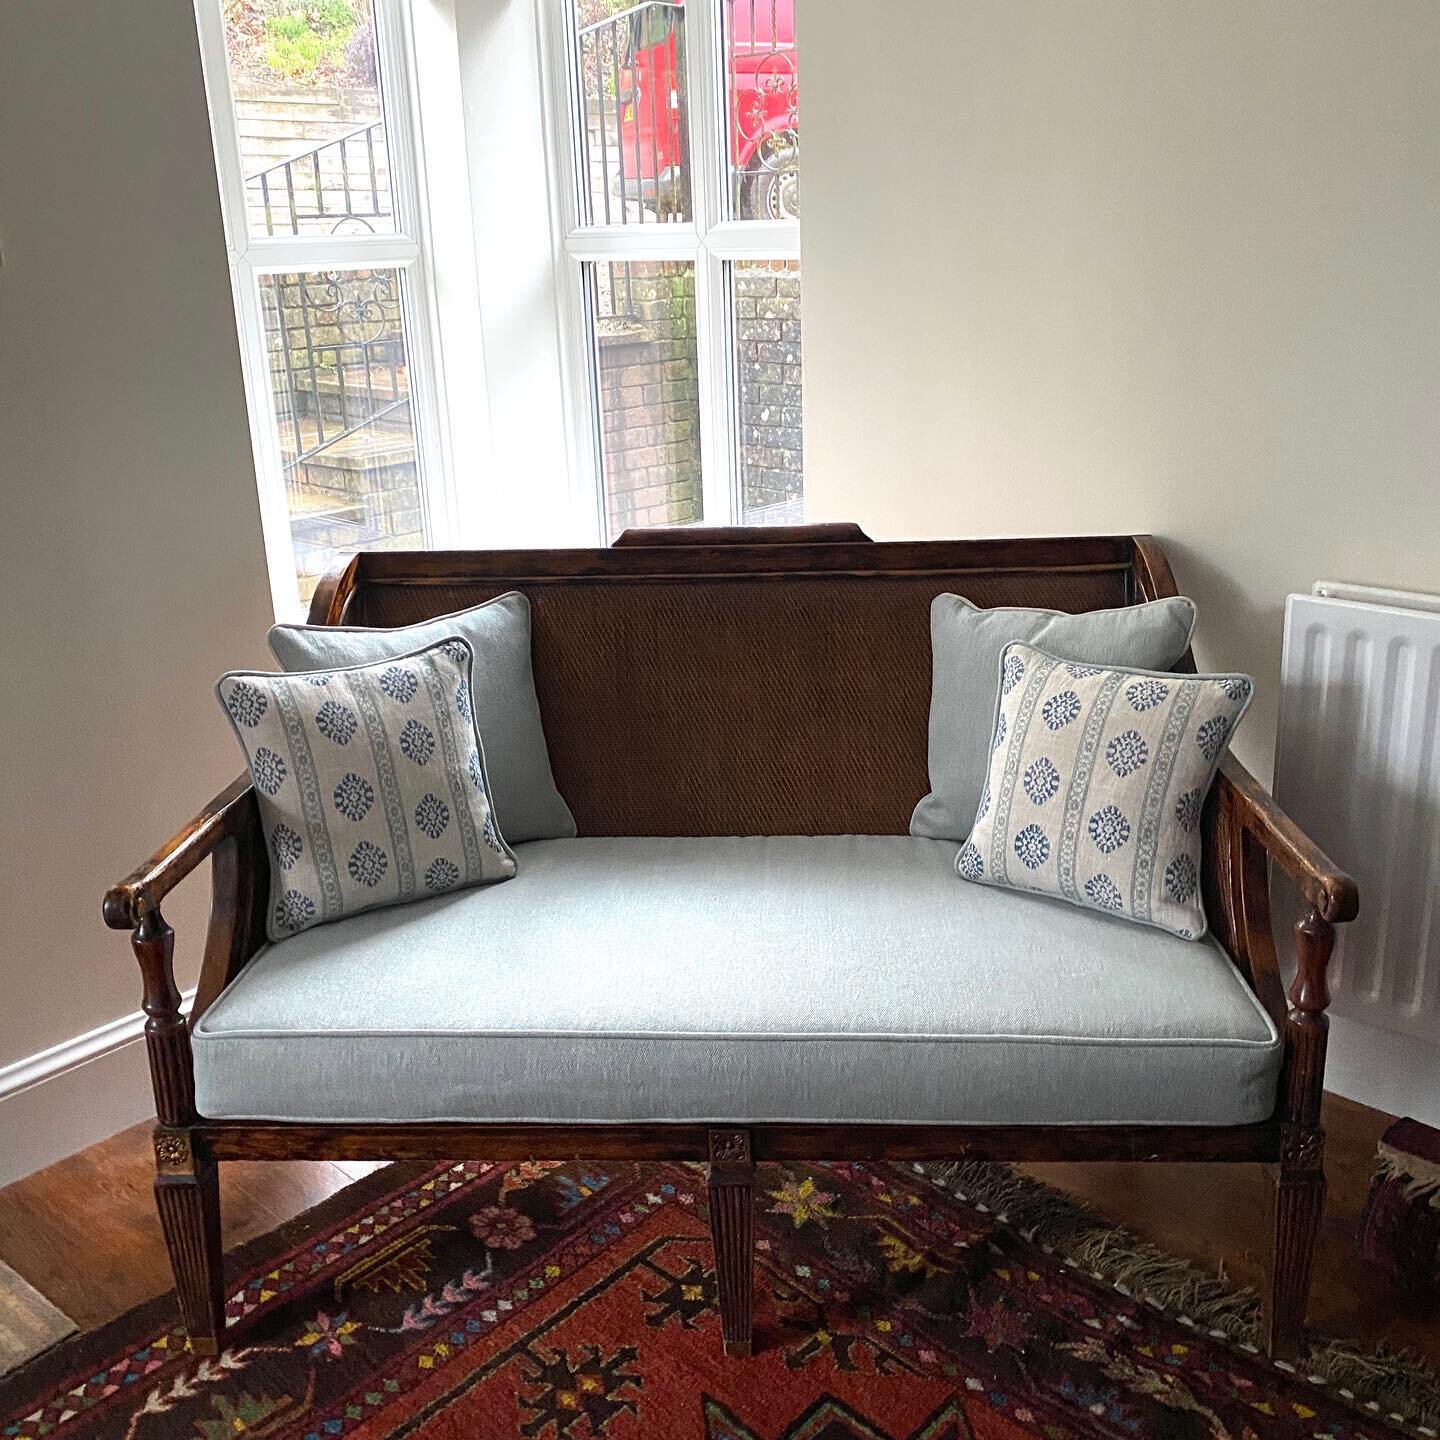 Perfect pairing. Lovely seat, now looking more comfortable and welcoming in this entrance hall.
@colefaxandfowler @gpjbaker #colefaxandfowler #gpjbaker #seating #designinspiration #hallwaydecor #cushions